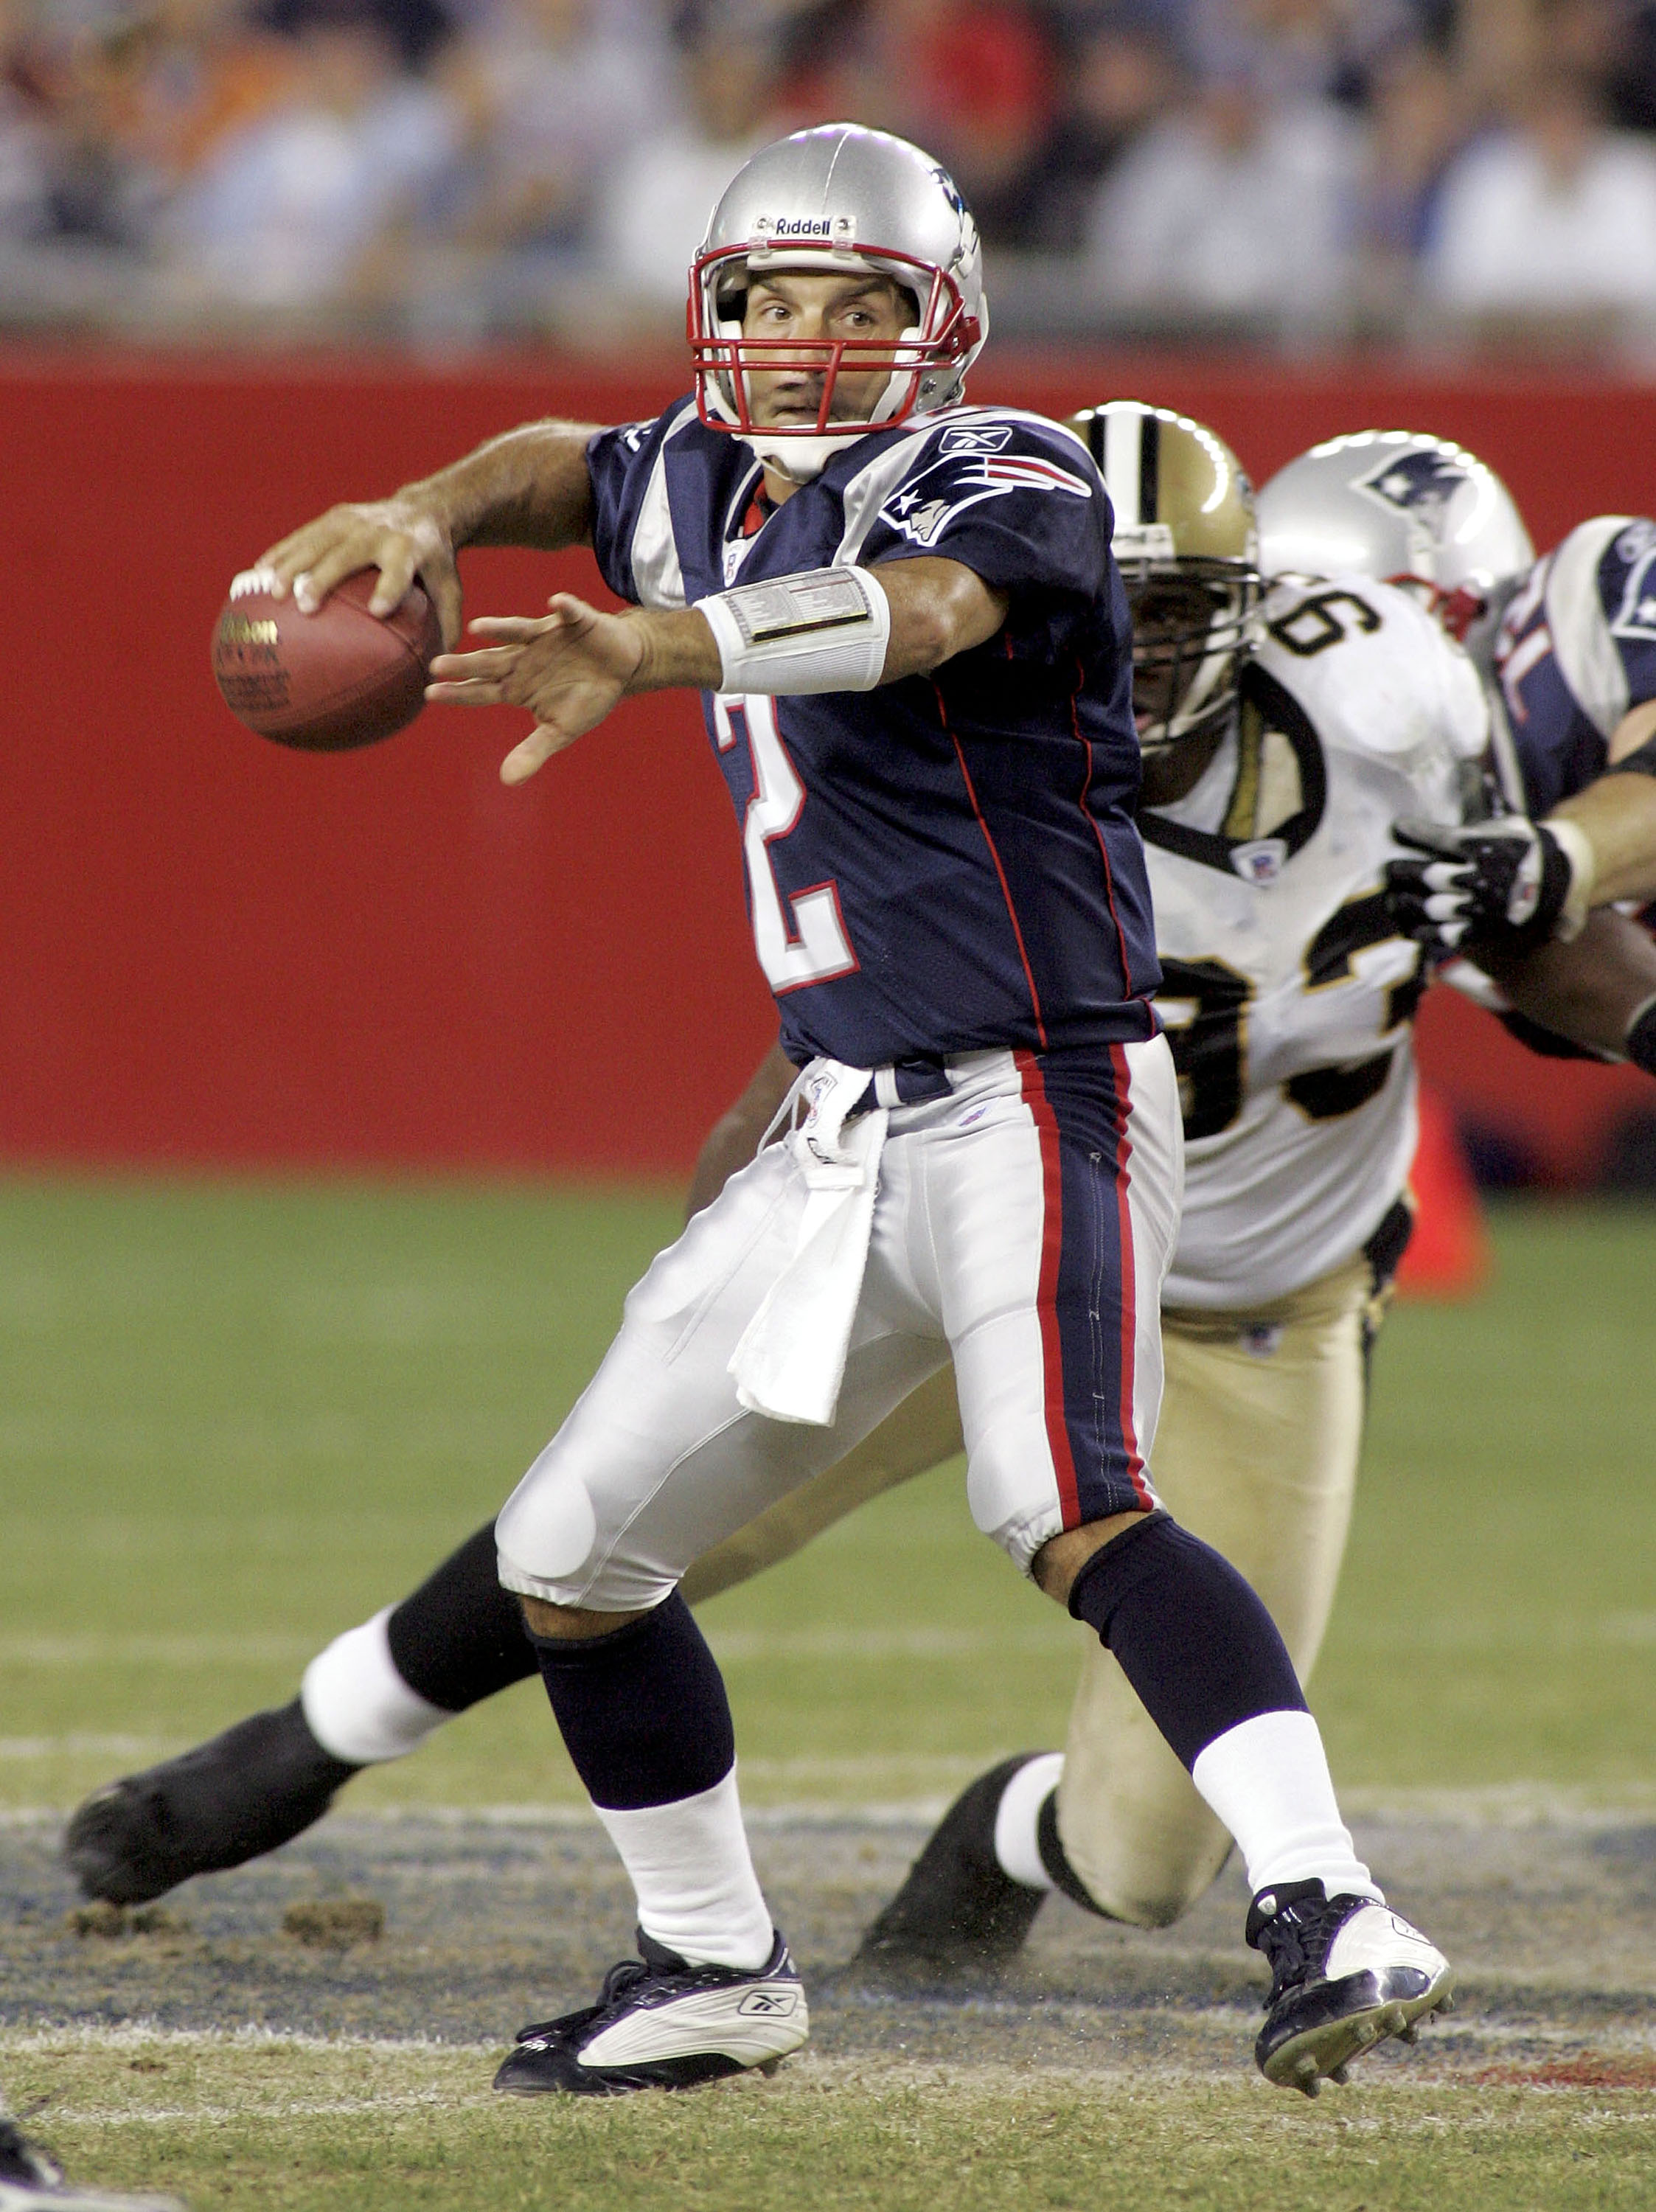 FOXBORO, MA - AUGUST 18:  Quarterback Doug Flutie #2 of the New England Patriots looks to pass against the New Orleans Saints at Gillette Stadium on August 18, 2005 in Foxboro, Massachusetts. The Saints won the game 37-27.  (Photo by Jim McIsaac/Getty Ima